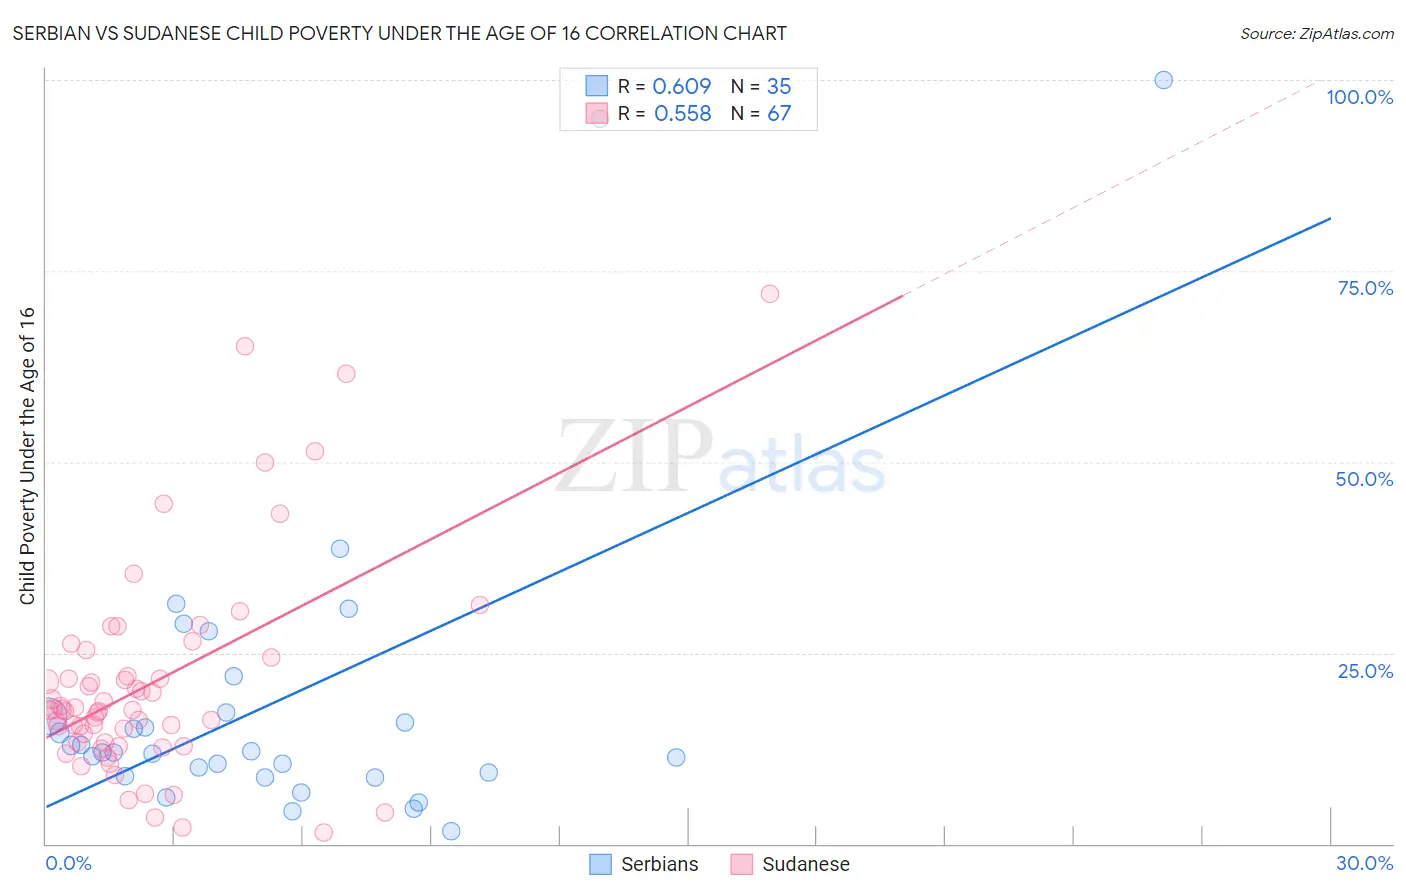 Serbian vs Sudanese Child Poverty Under the Age of 16